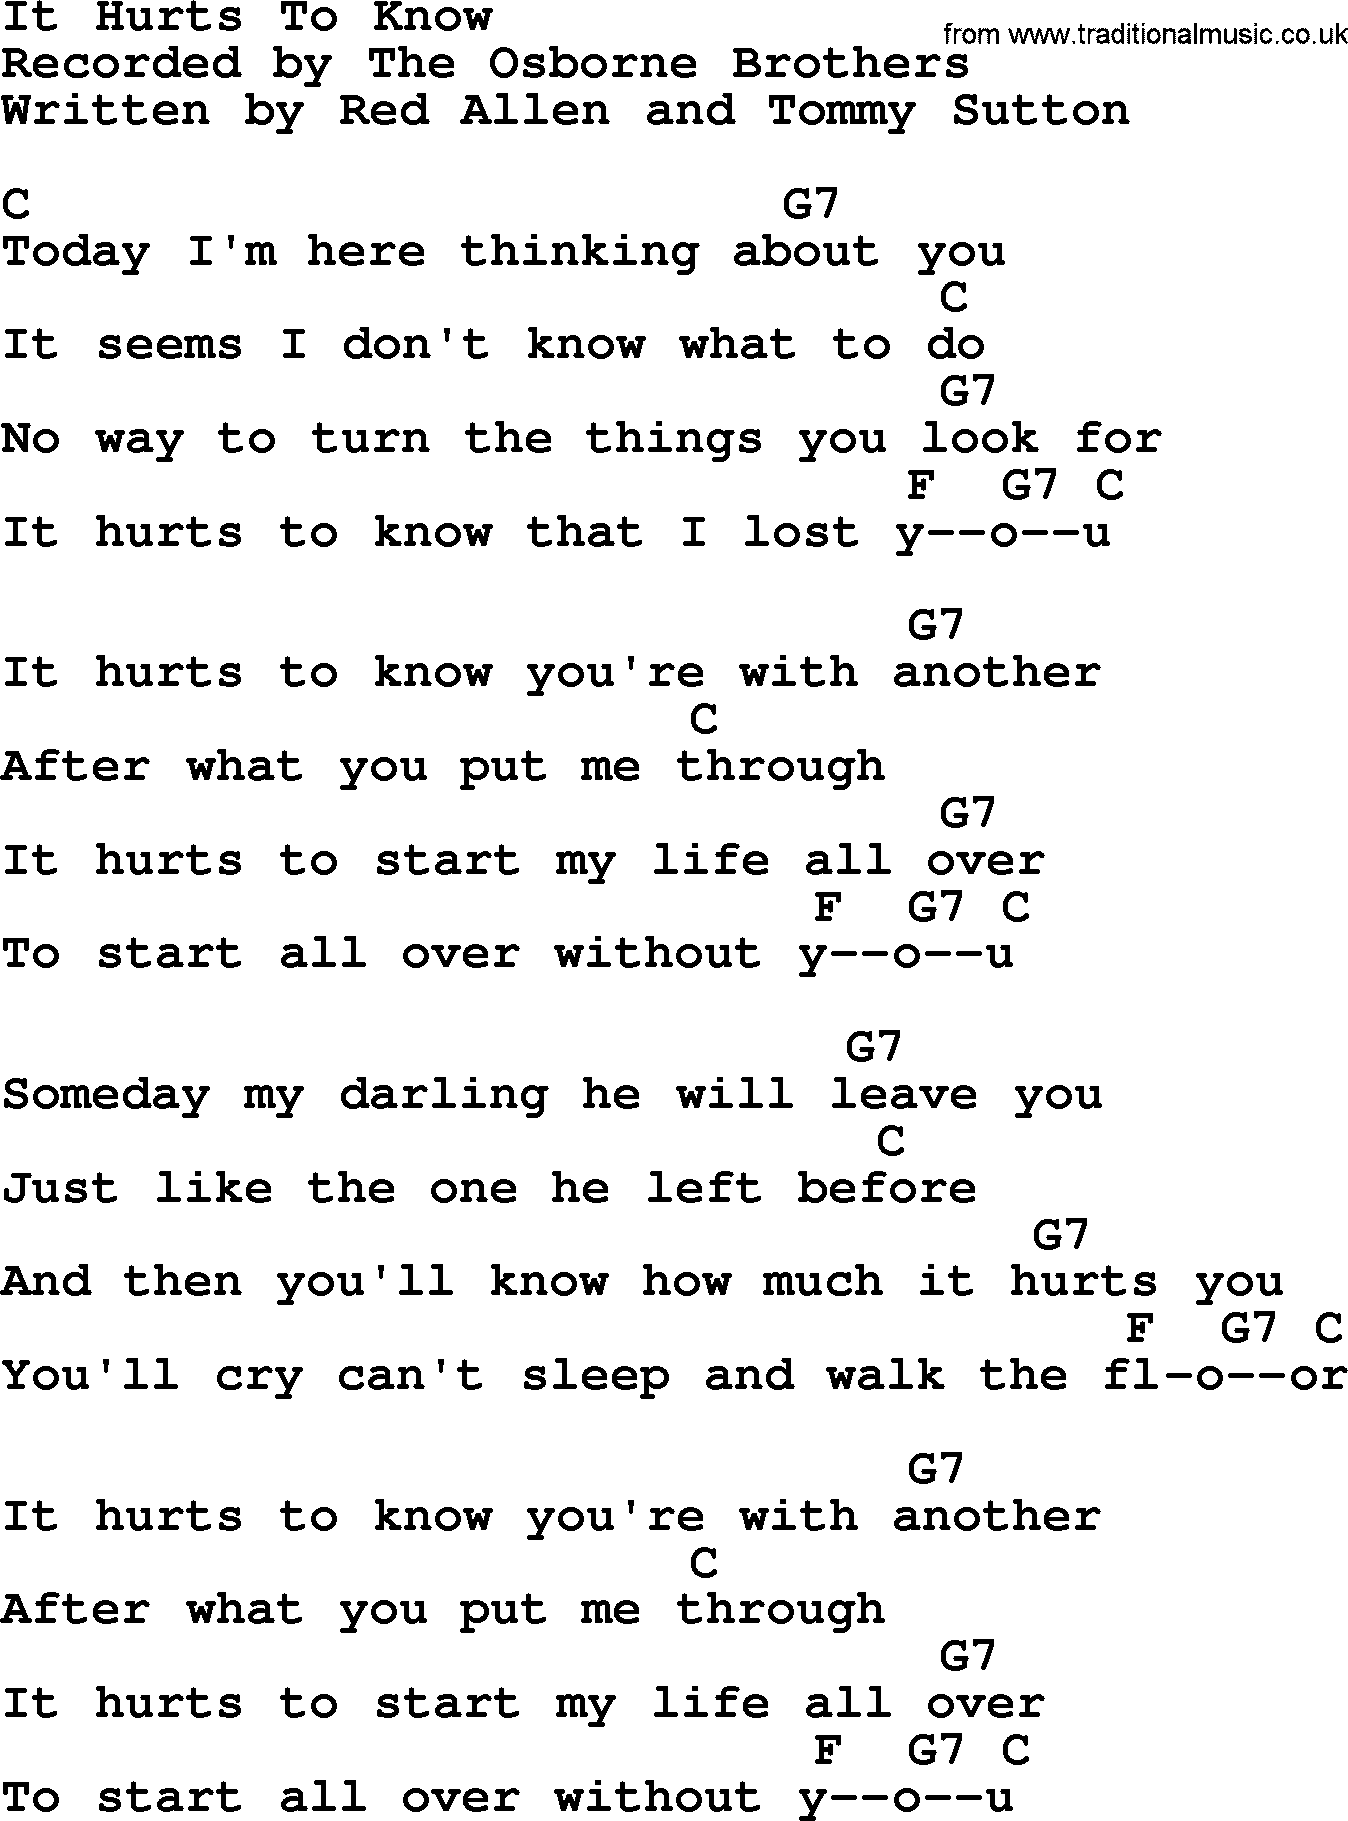 Bluegrass song: It Hurts To Know, lyrics and chords